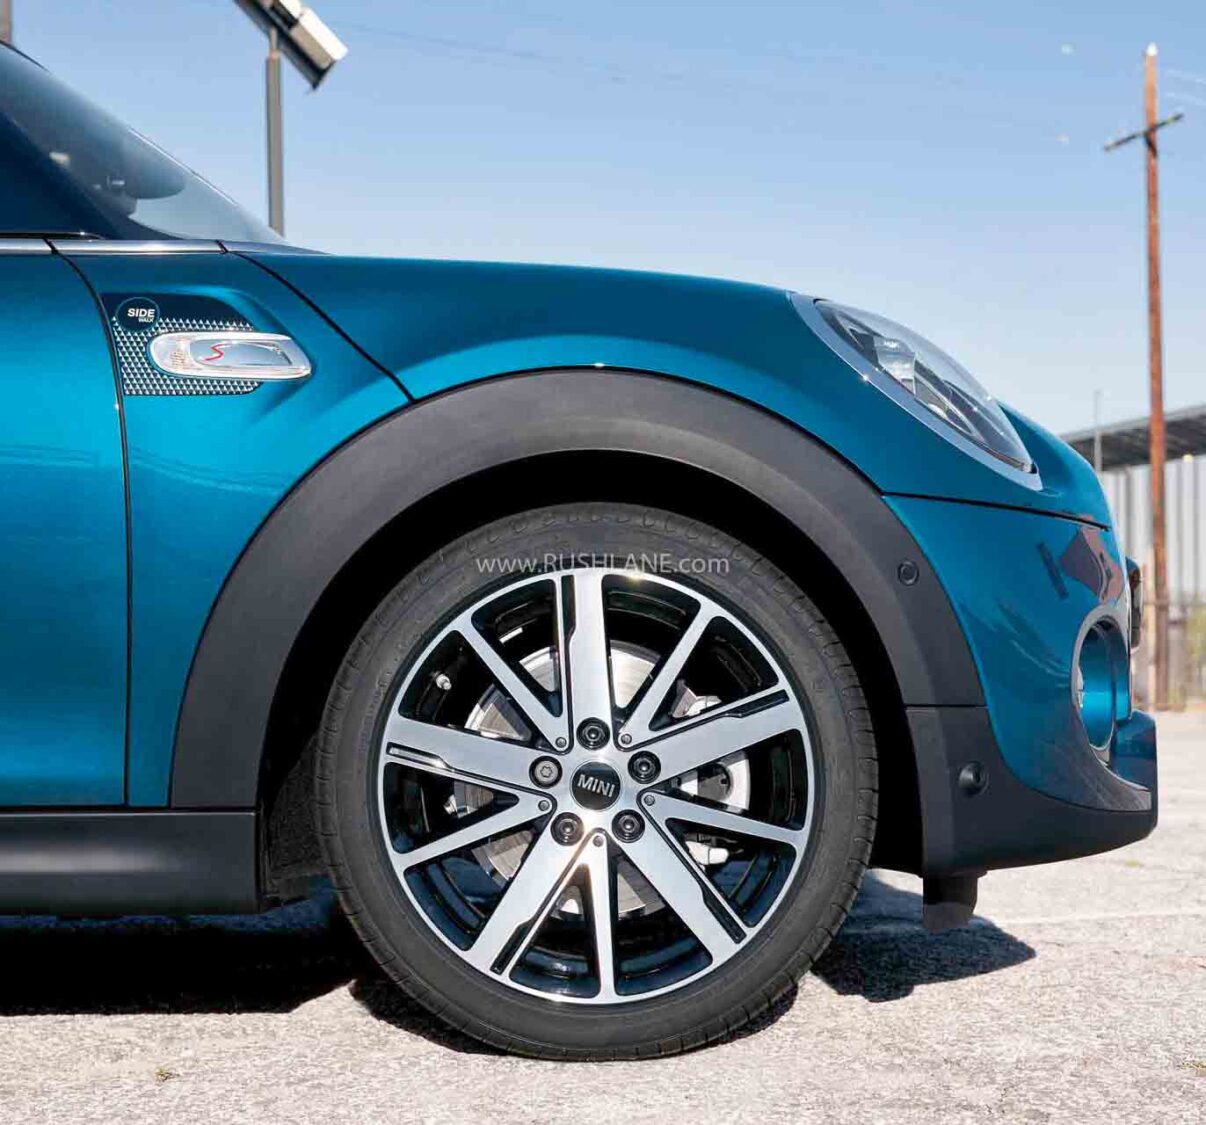 MINI Cooper S Convertible Sidewalk Edition Launch Price Rs 45 Lakh